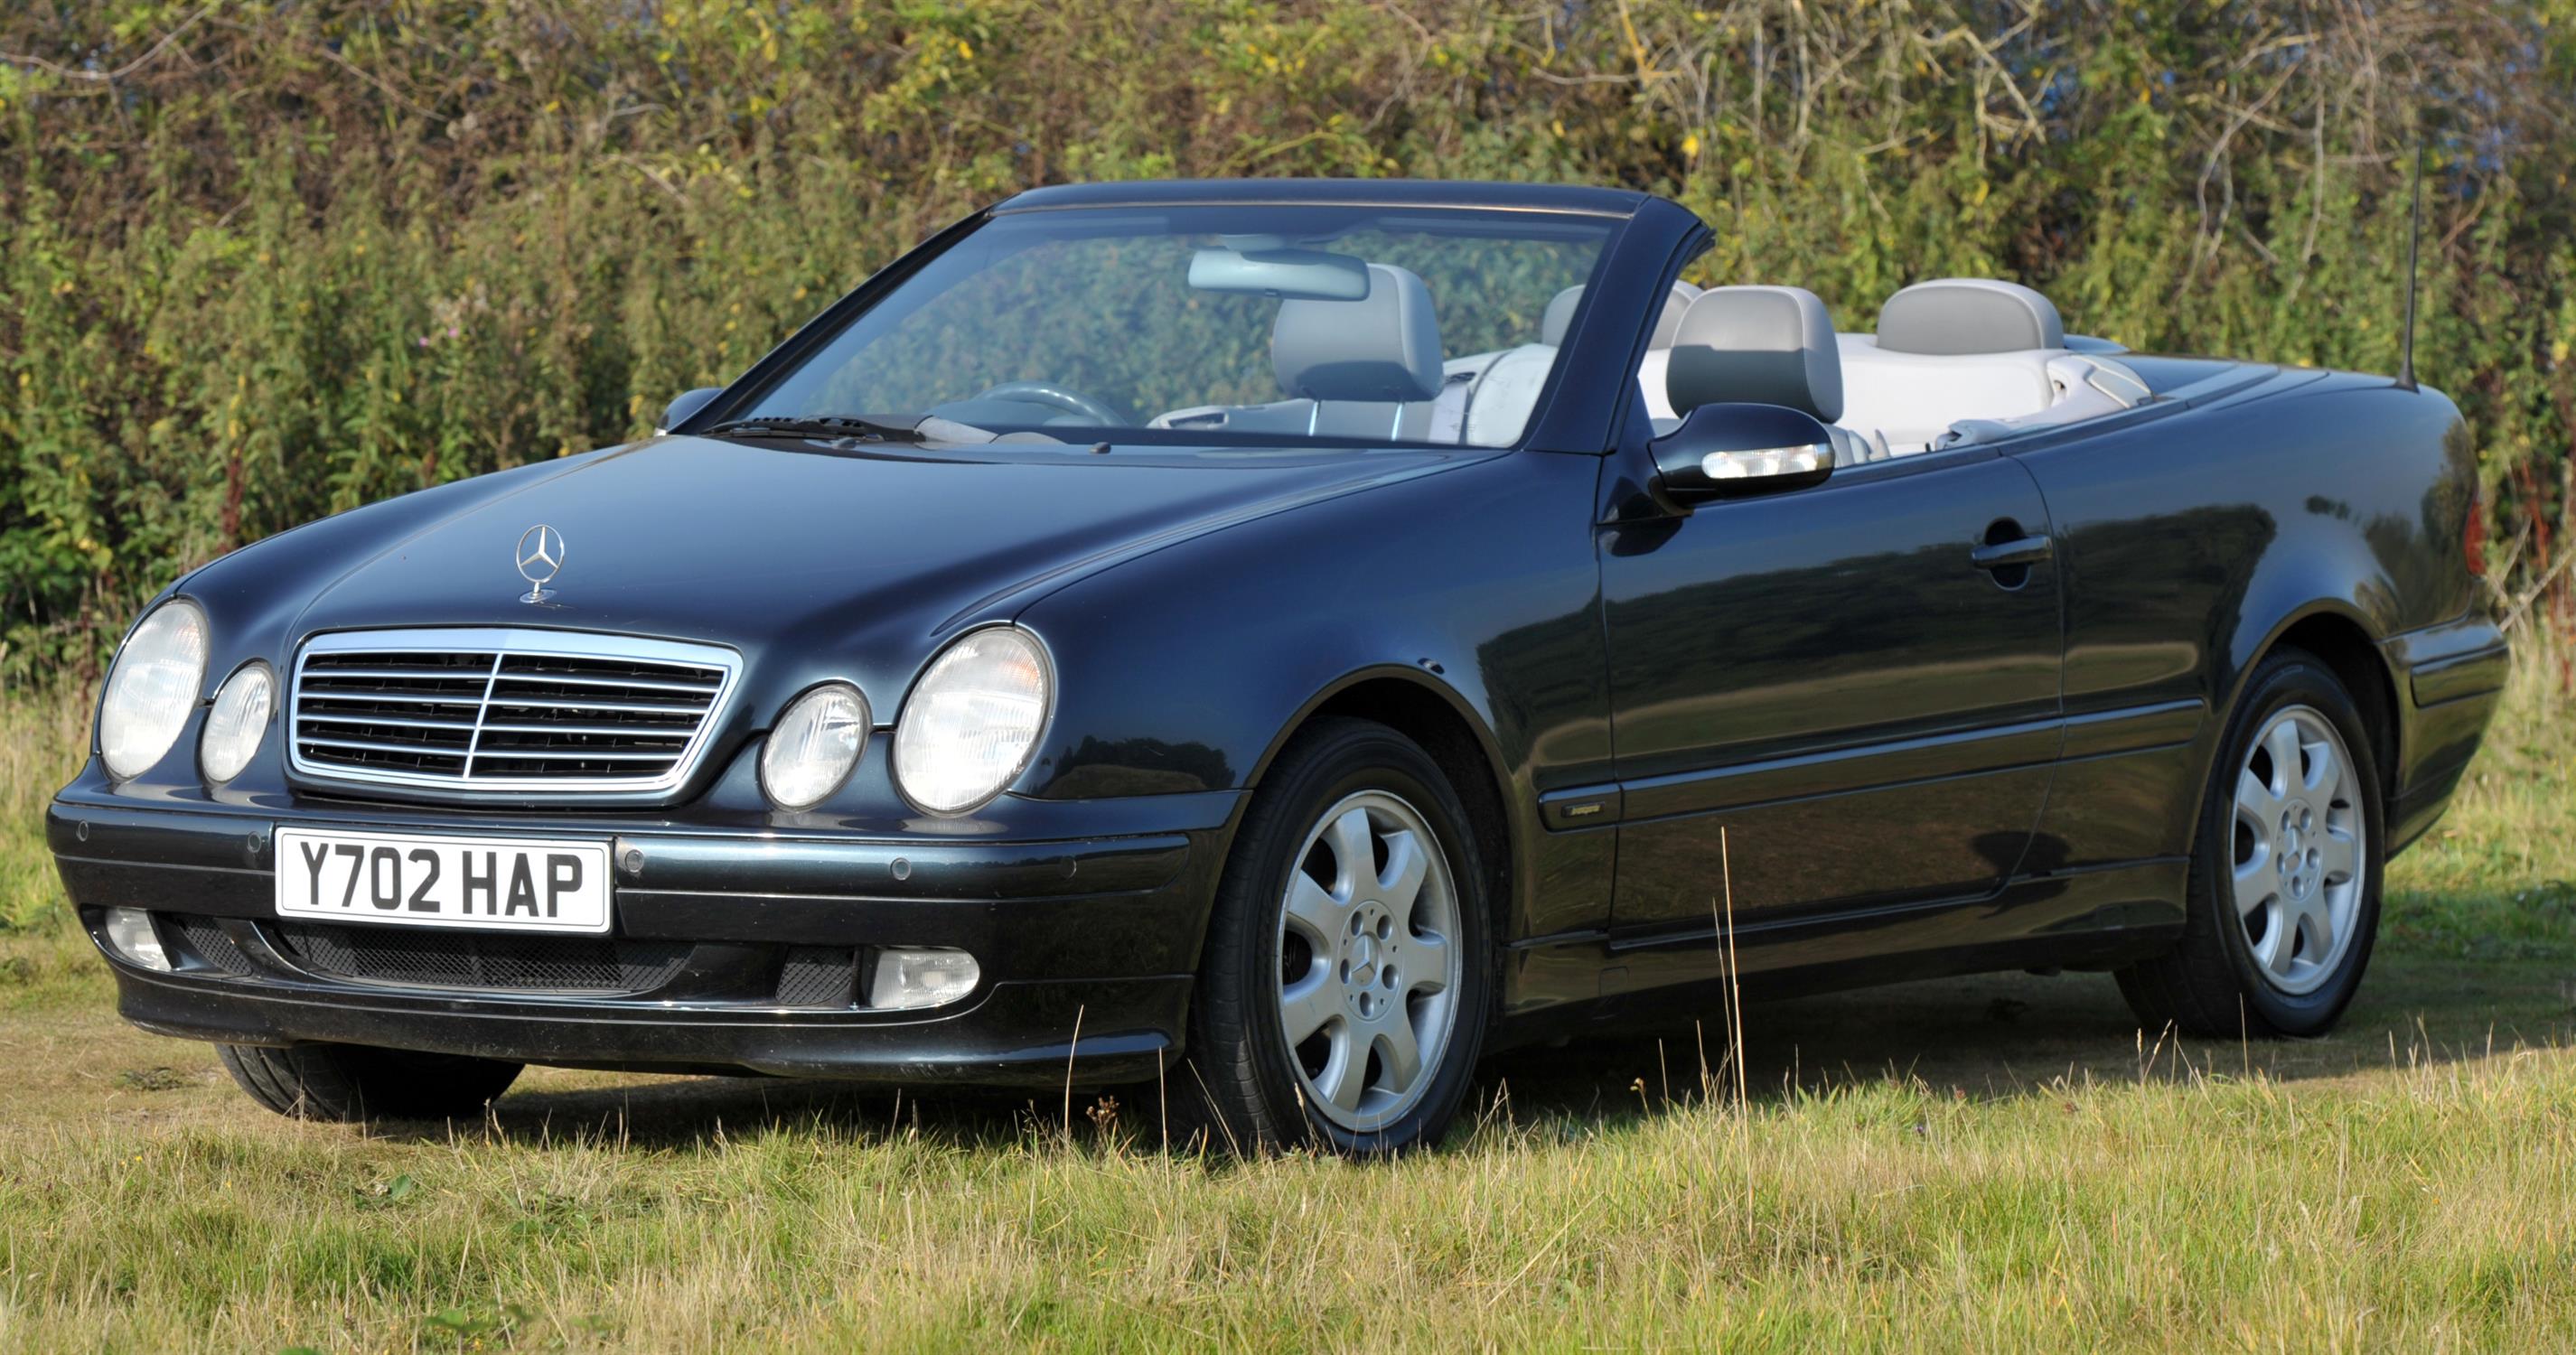 2001 Mercedes CLK 200 Petrol Convertible Automatic. Registration number: Y702 HAP. - Image 16 of 21